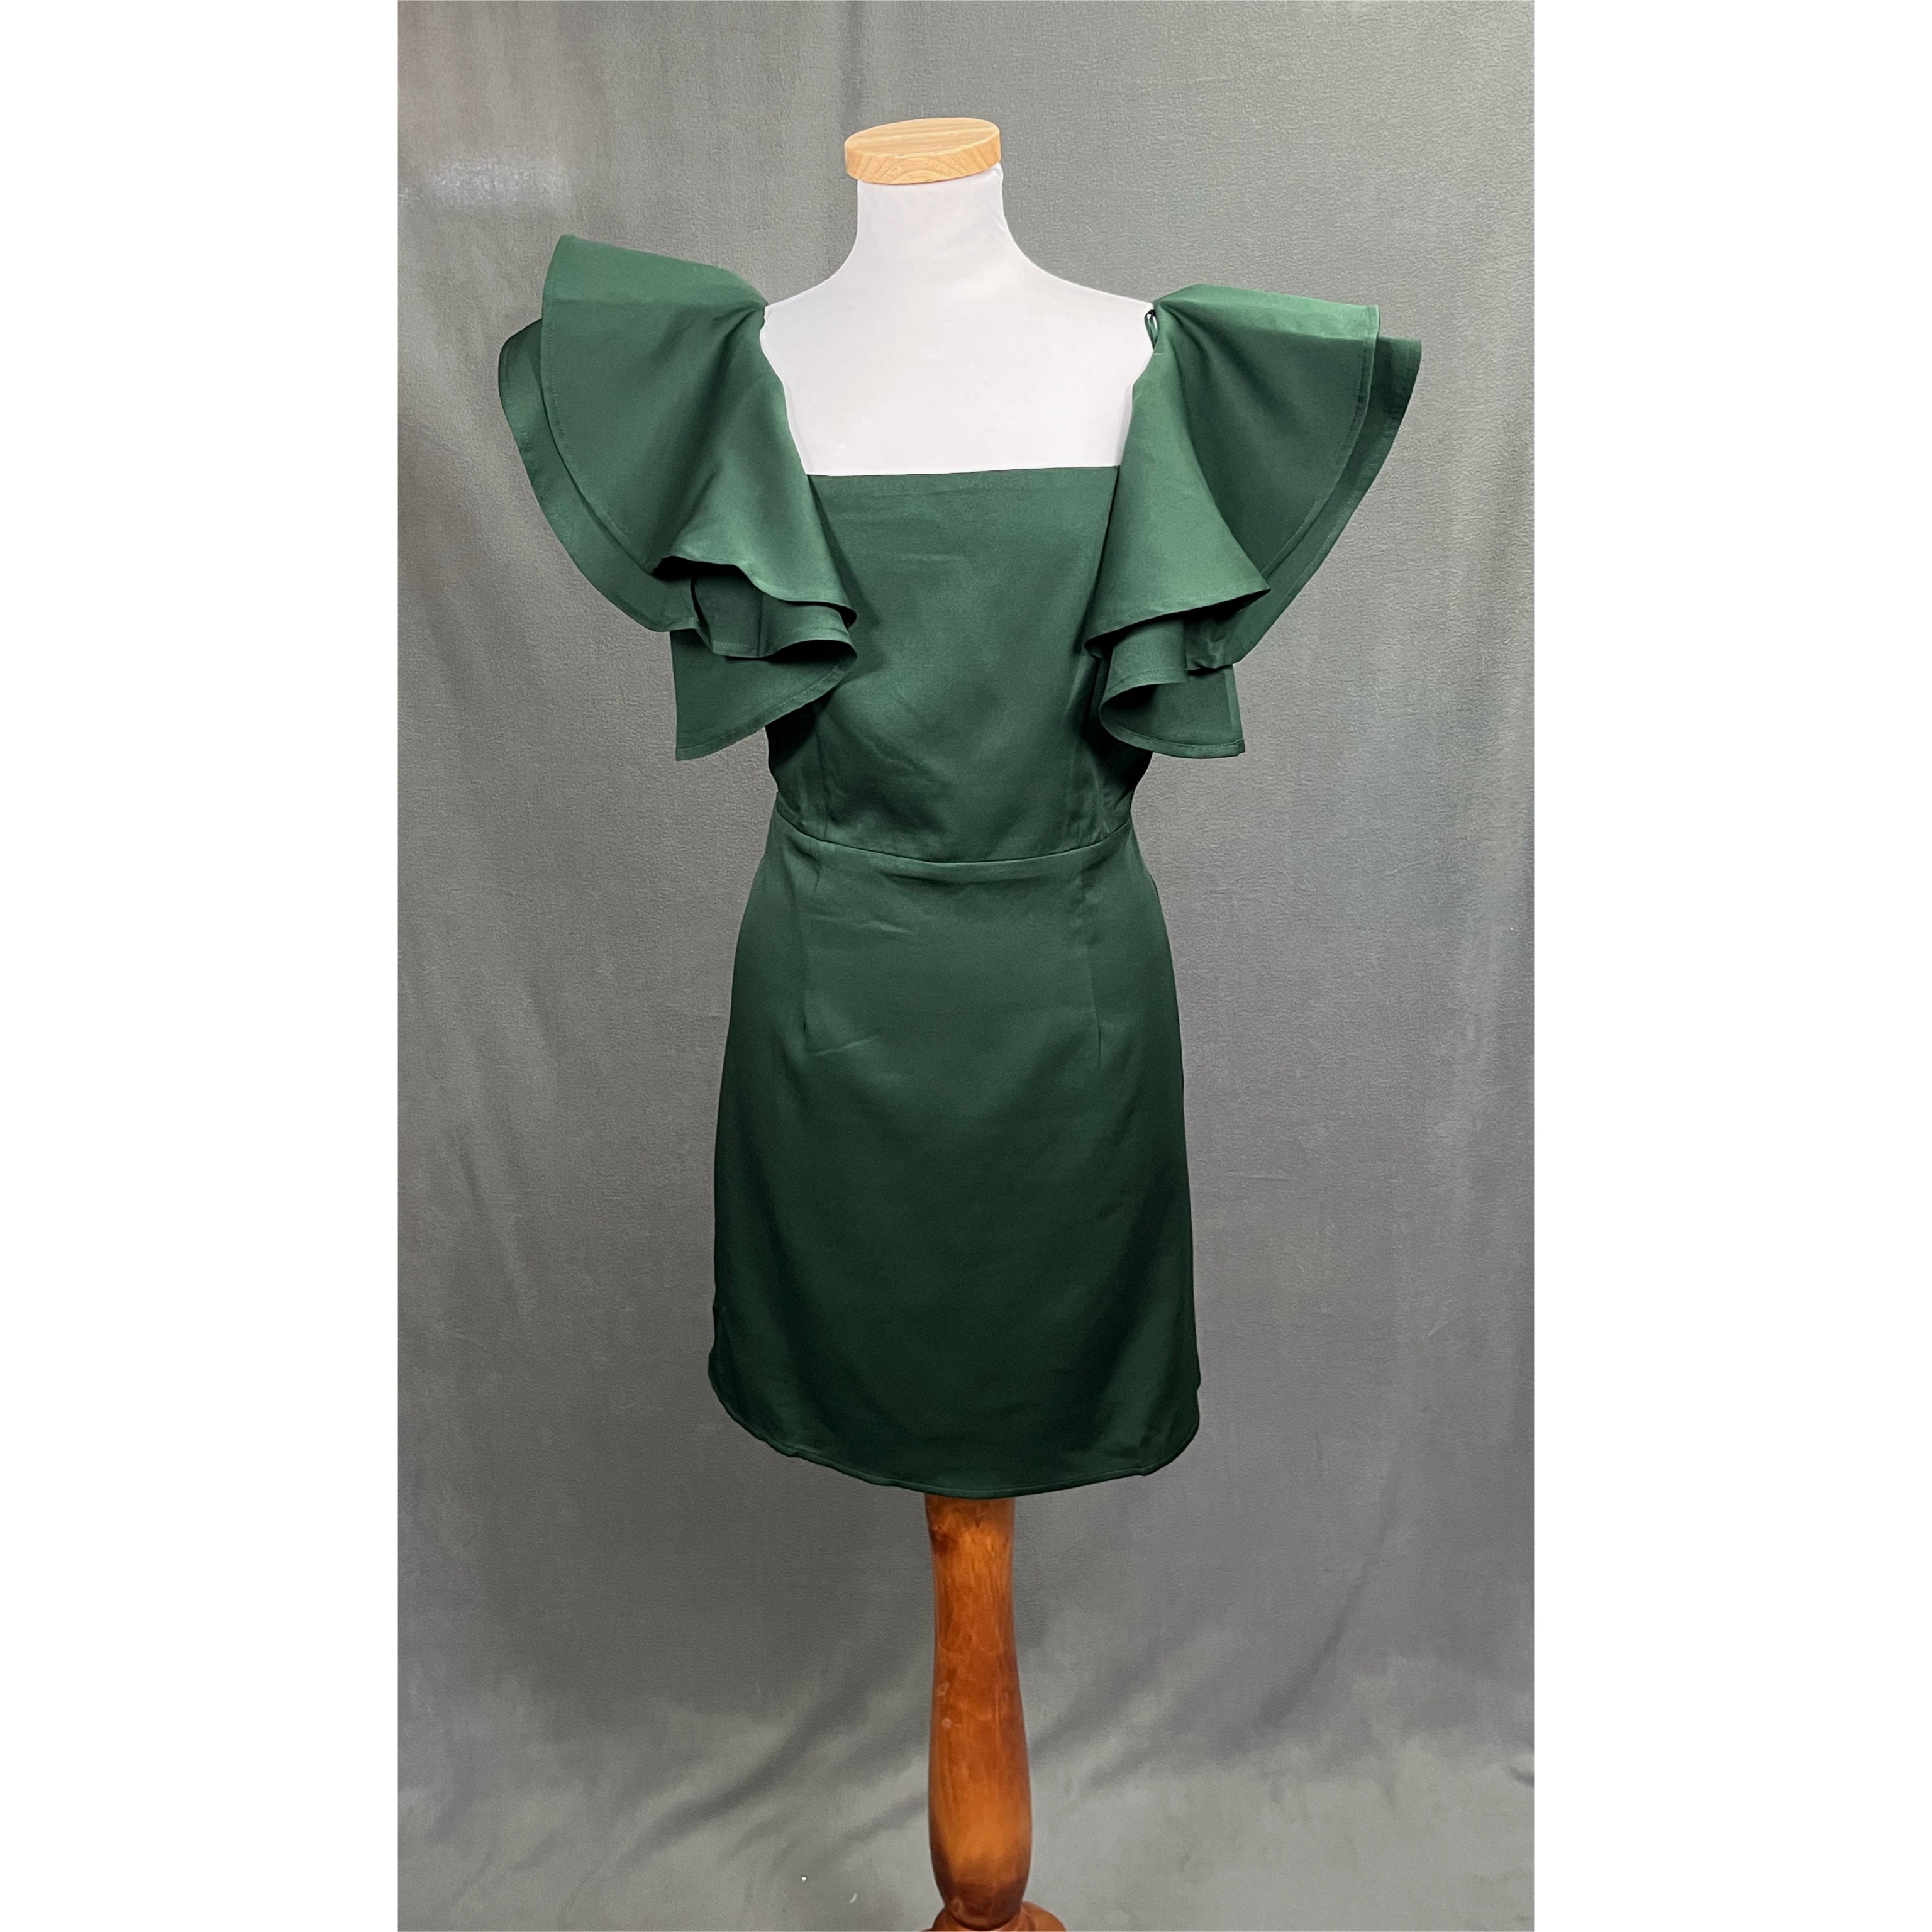 TCEC evergreen dress, size L, NEW WITH TAGS!